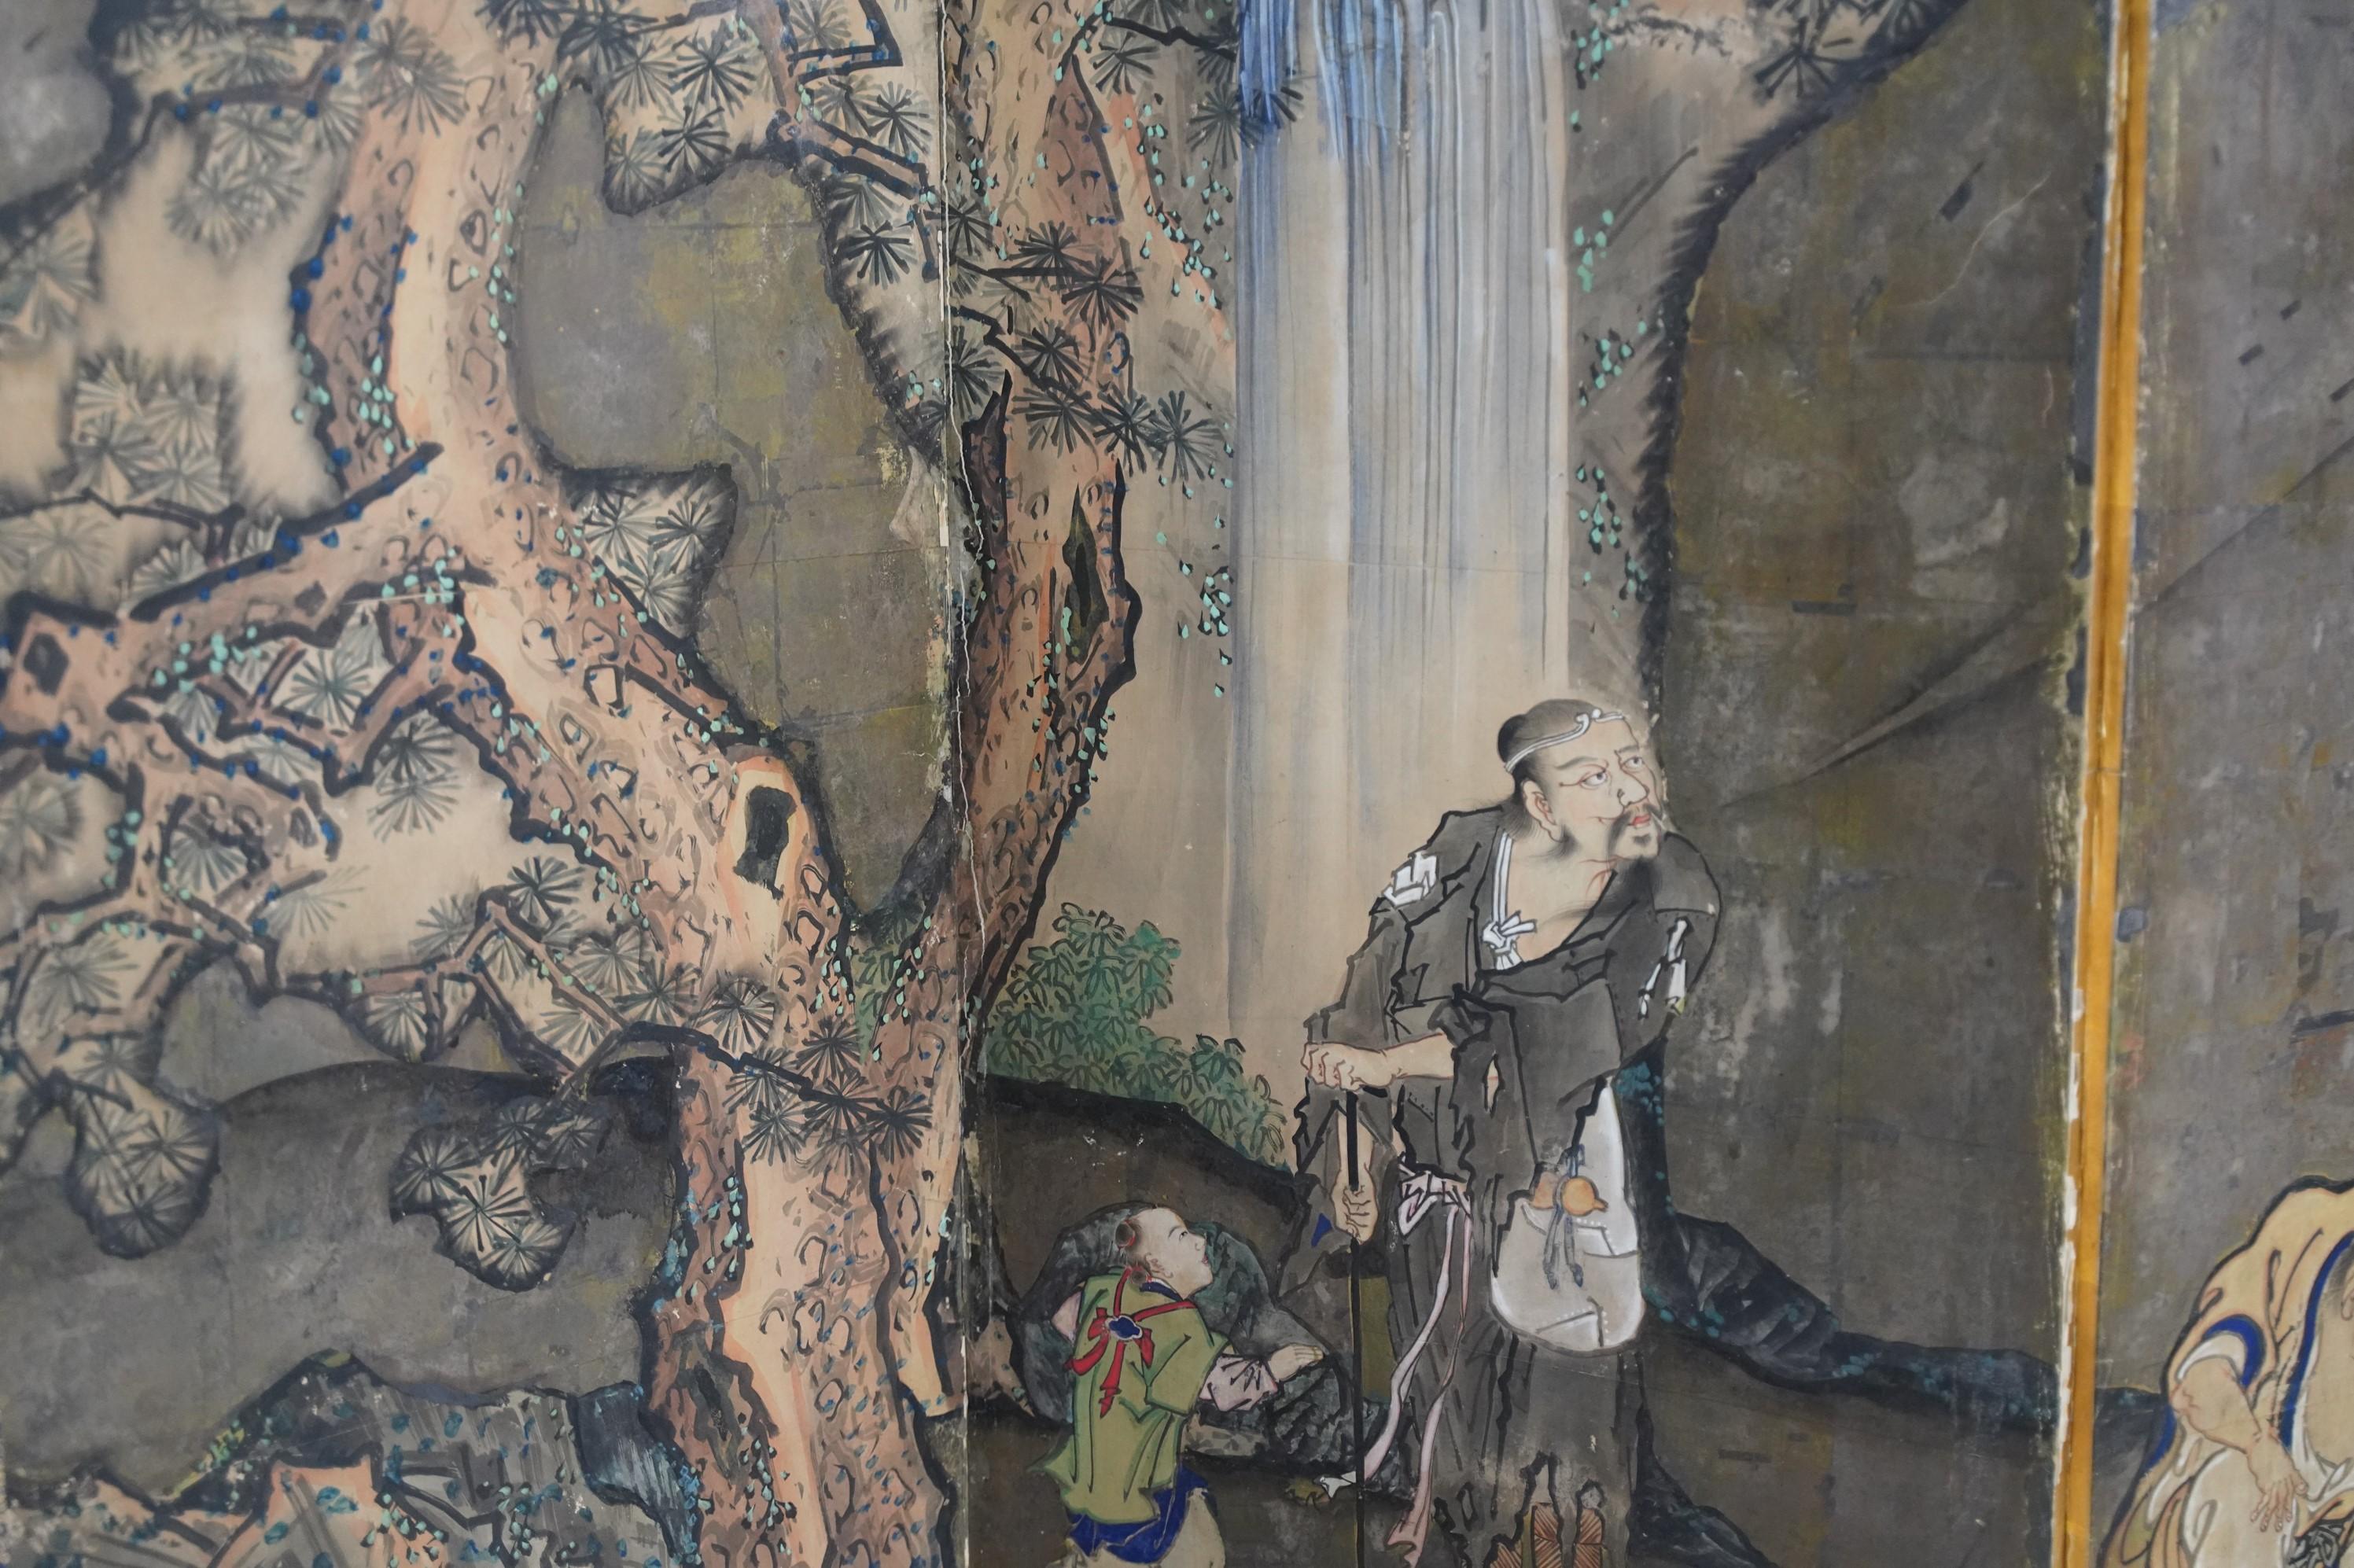 A gorgeous, strangely beautiful, unusually engaging, and alluring hand-painted large six-panel Japanese/Asian Byobu folding screen depicting an almost magical/ mythical nature scene with flowing waterfalls, crashing ocean waves, and a blackened